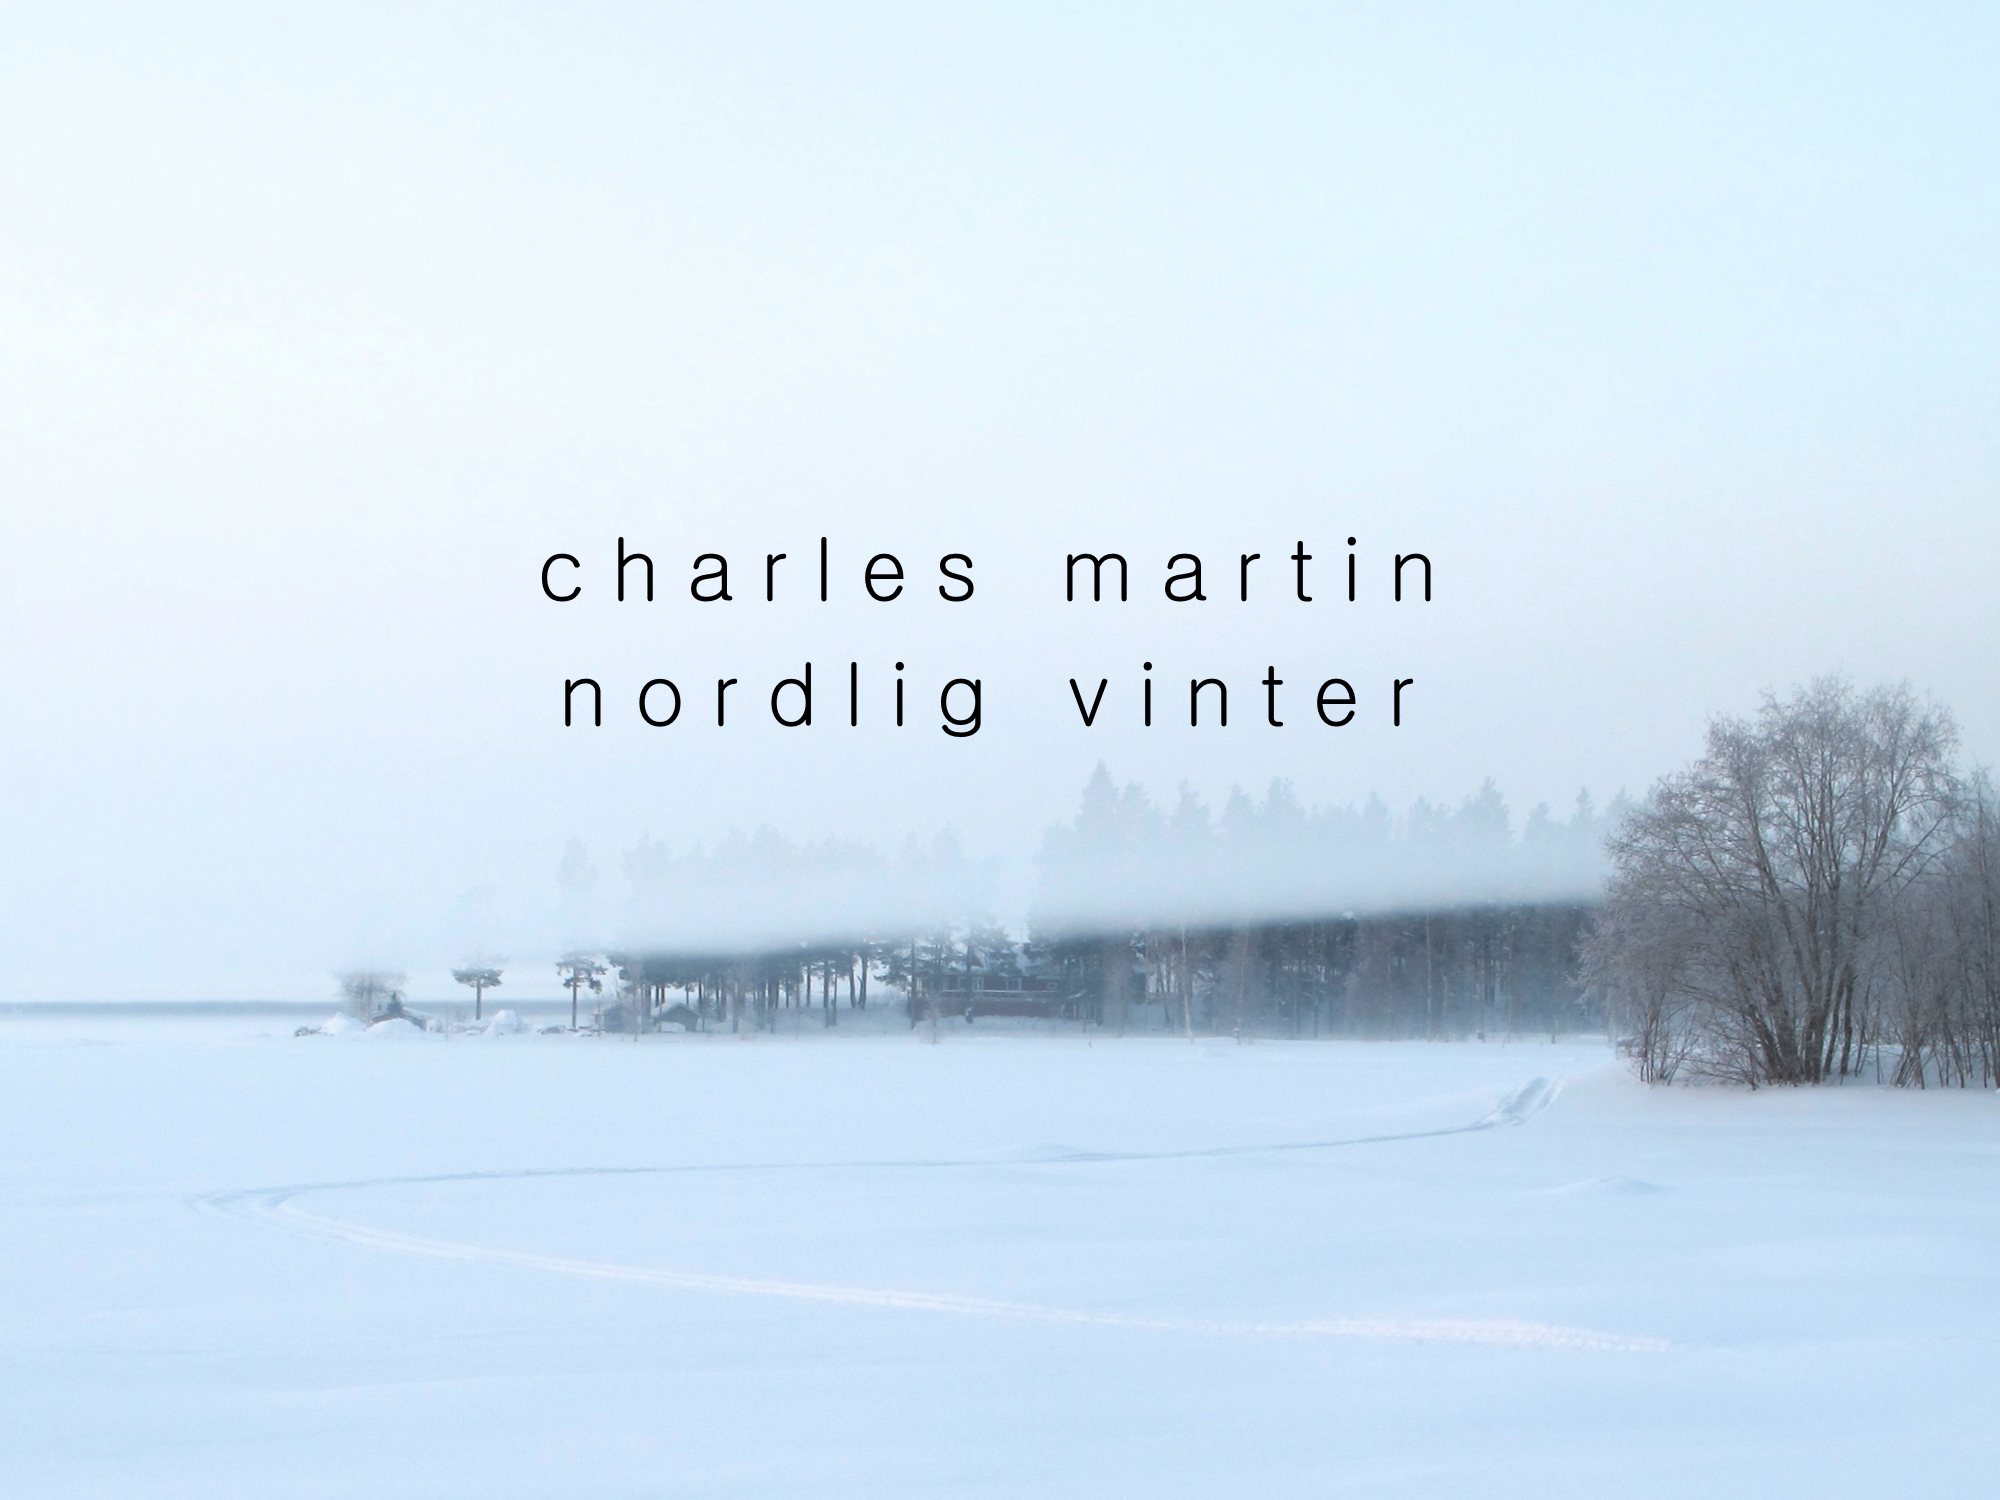 Cover of the Nordlig Vinter album showing a snow covered lake